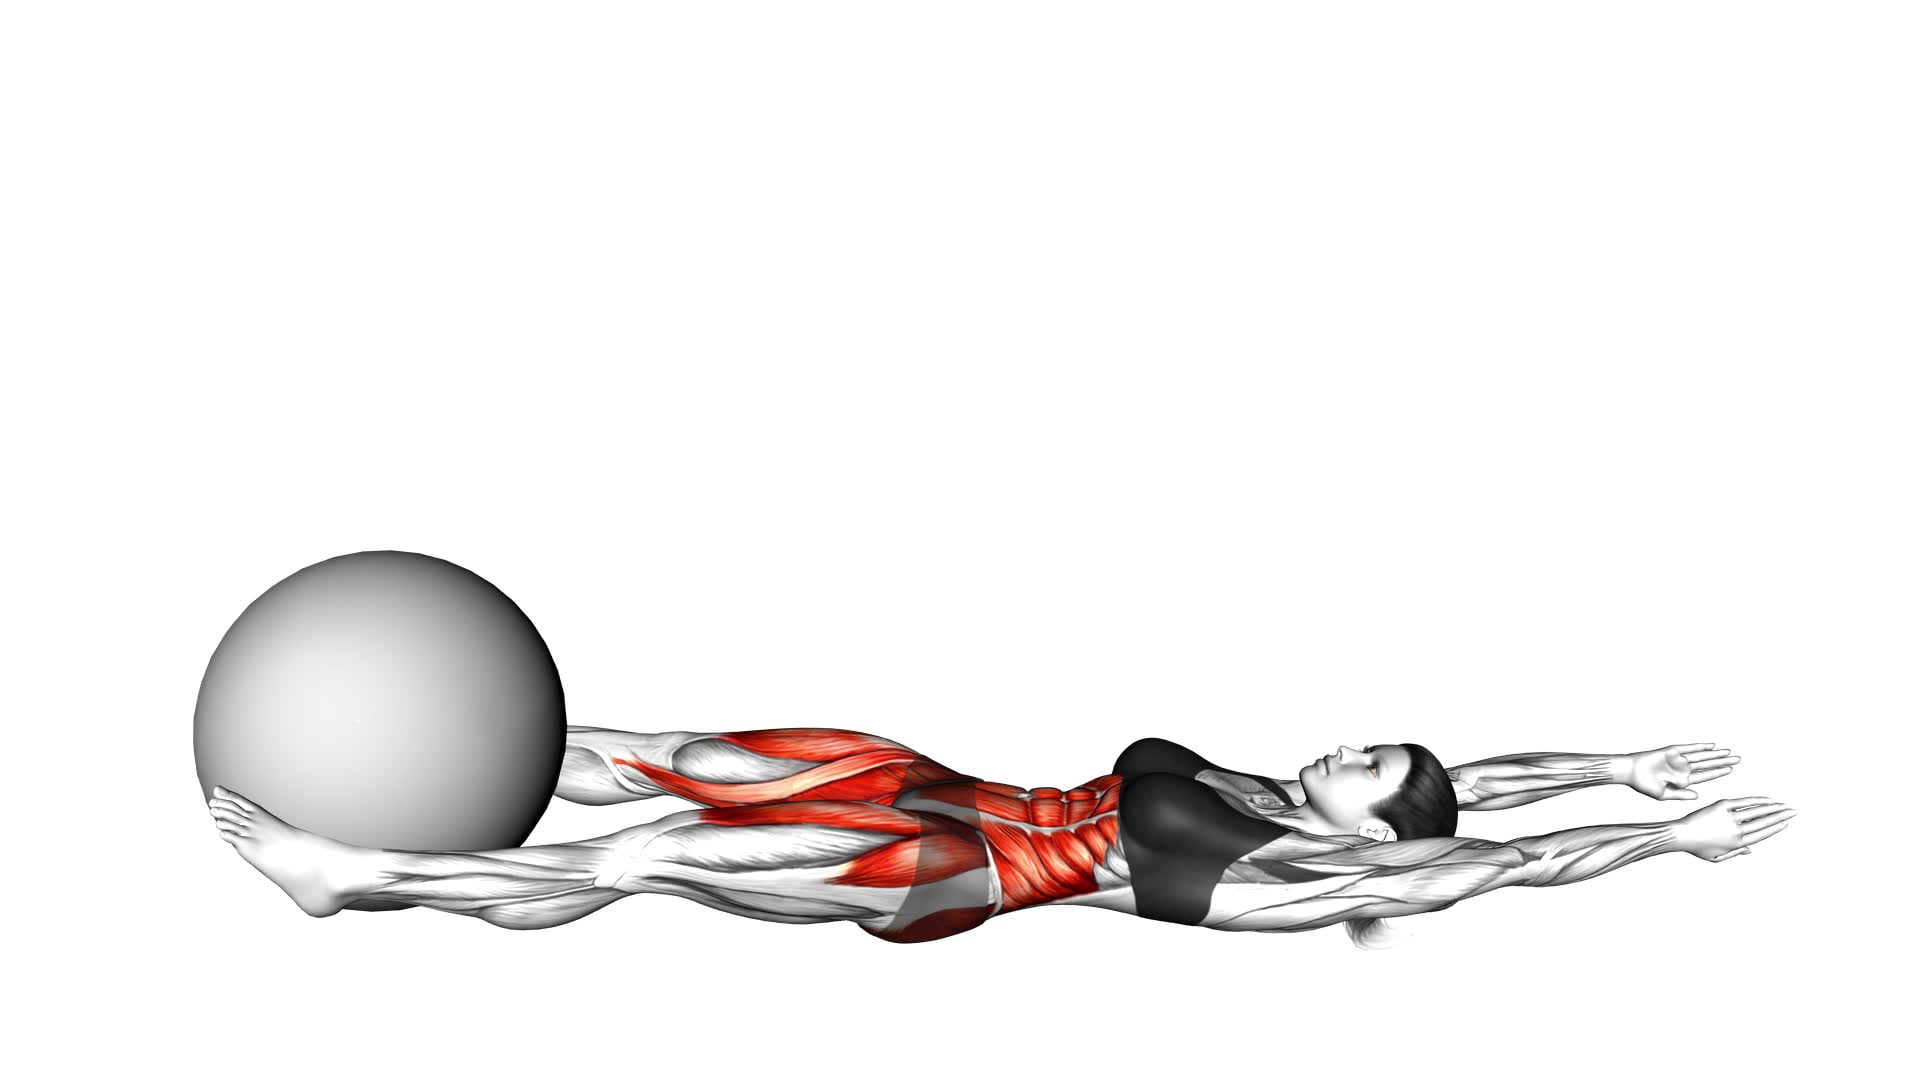 V-Up-Down (With Stability Ball) (Female) - Video Exercise Guide & Tips